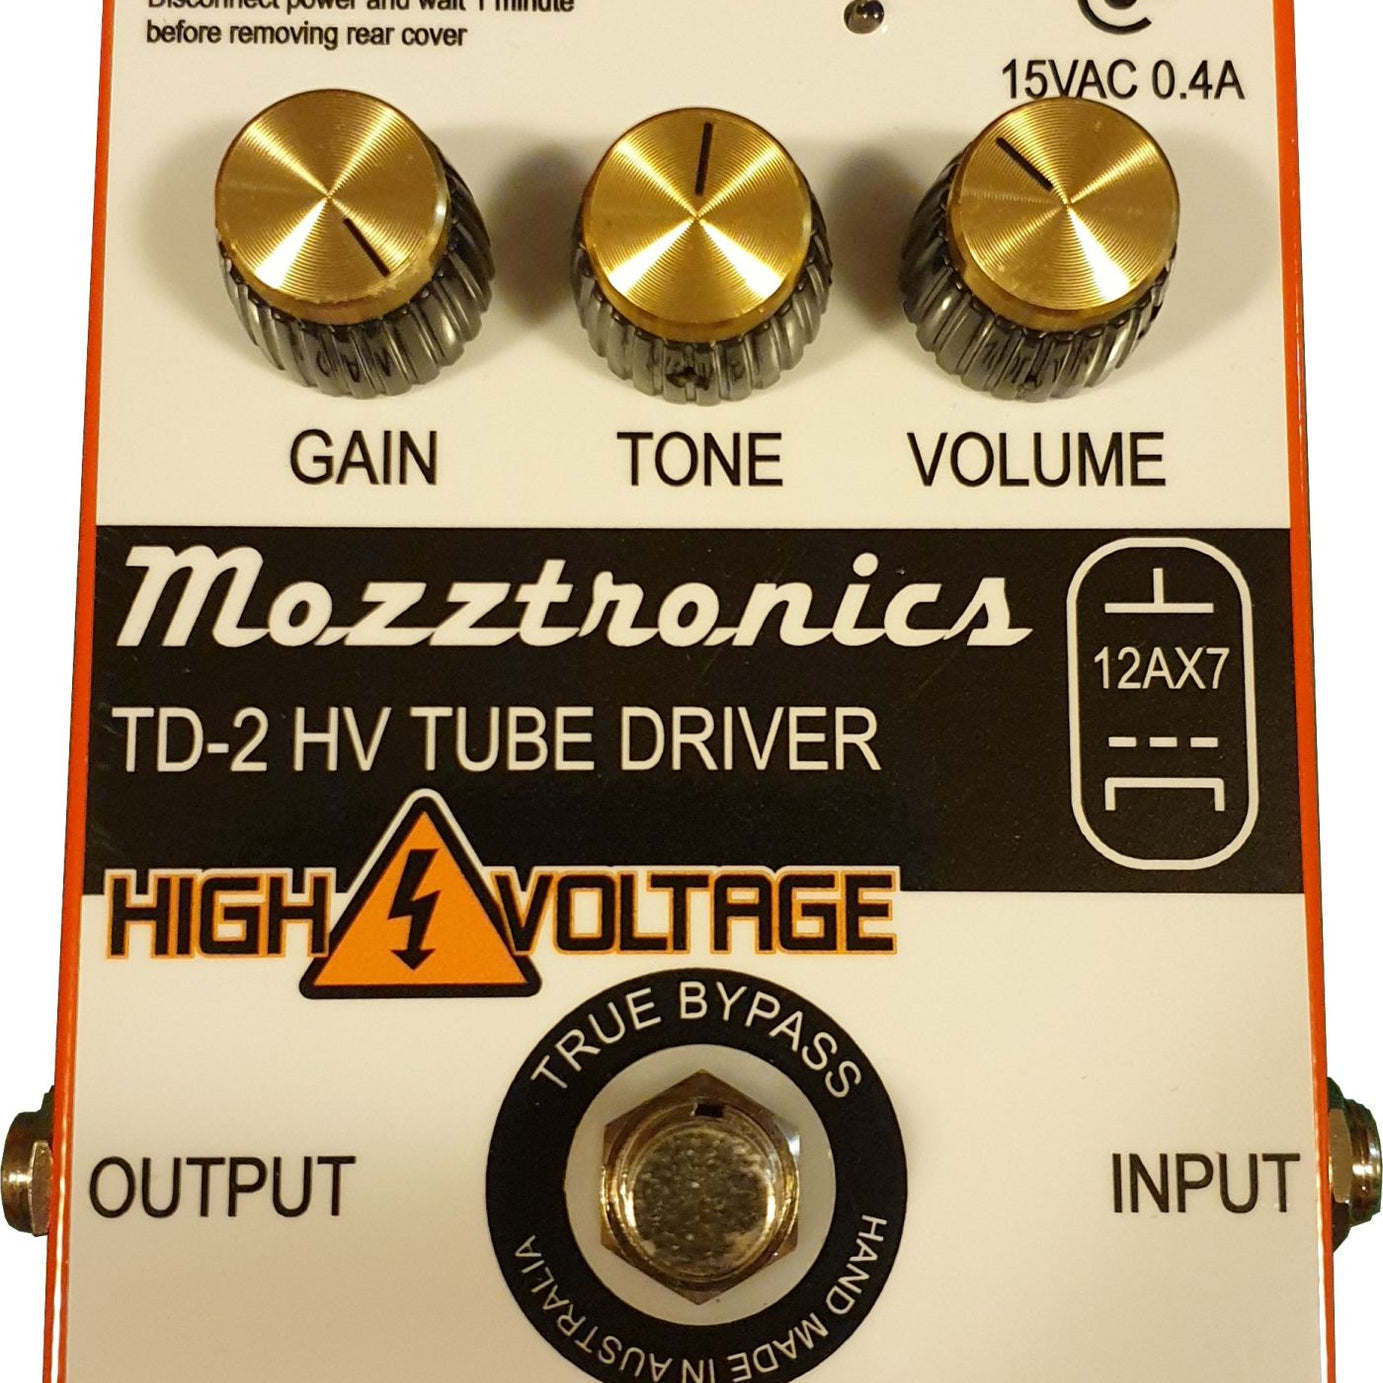 Mozztronics TD-2 High Voltage Tube Driver Effects Pedal